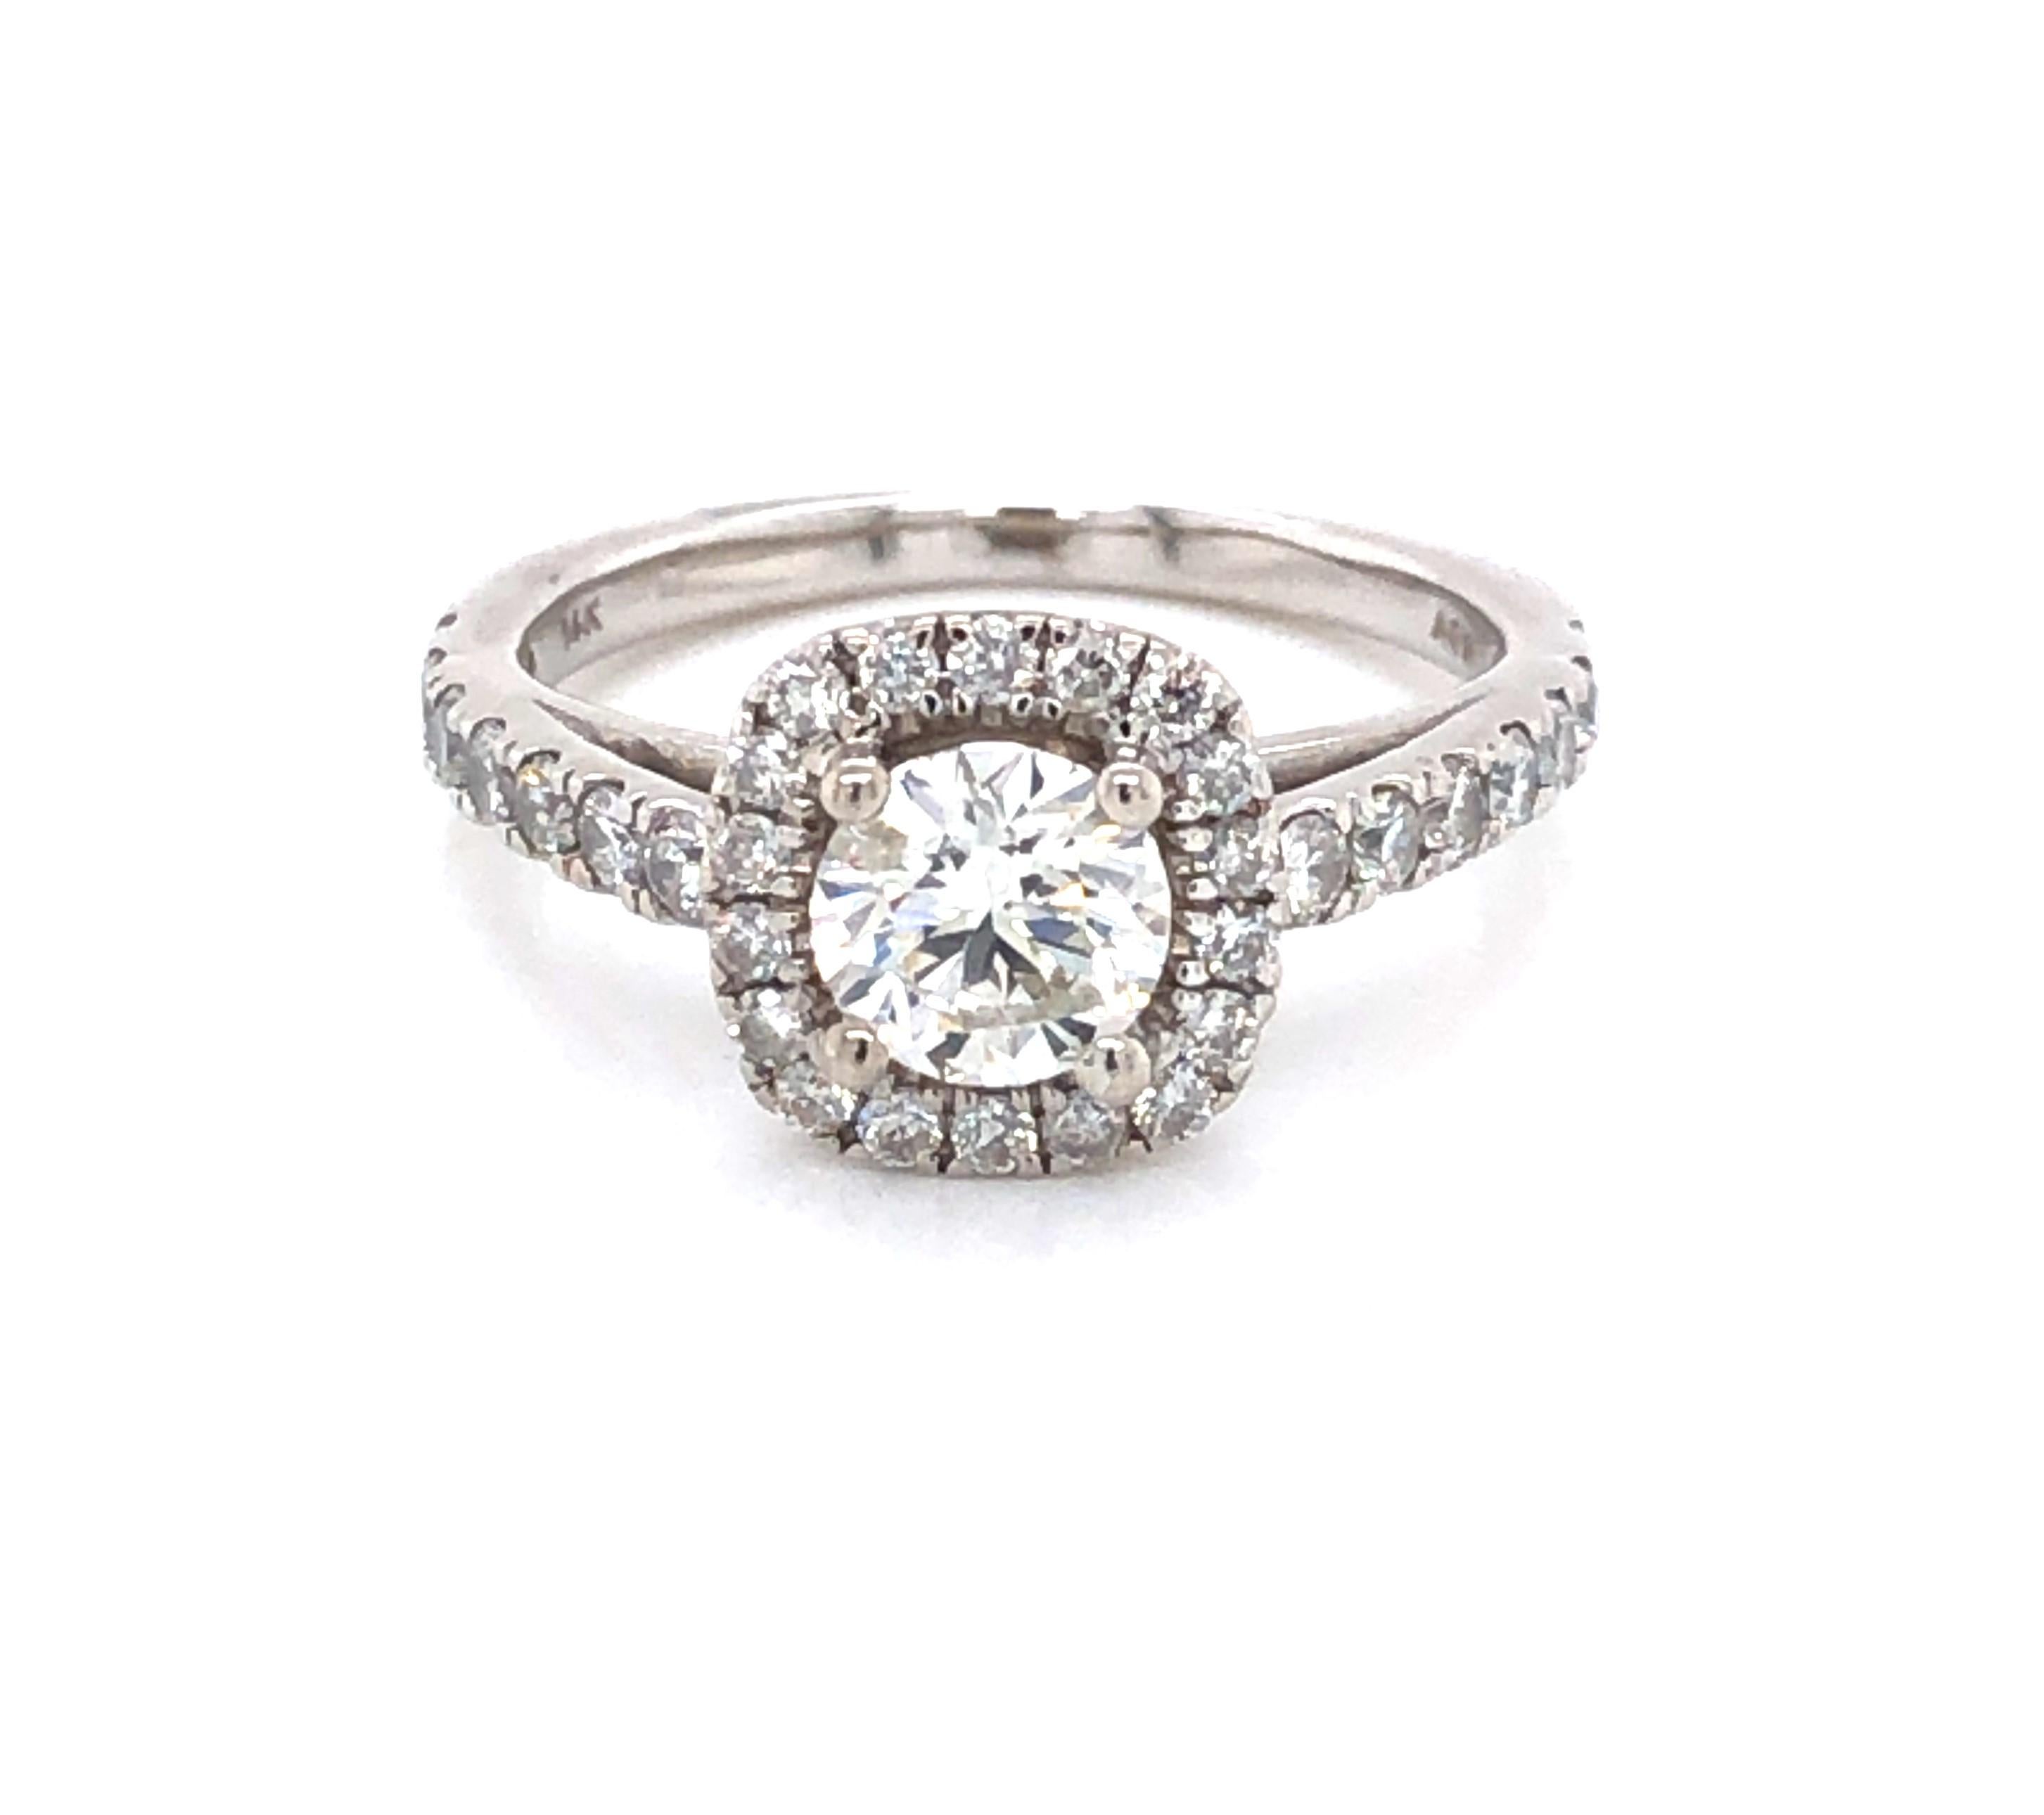 A beautiful and classic style that has plenty of sparkle and fire. The variety of shapes creates visual interest and adds flash to the center stone. In fourteen karat 14k white gold, the round .55 carat center H/SI1 diamond is complemented by a